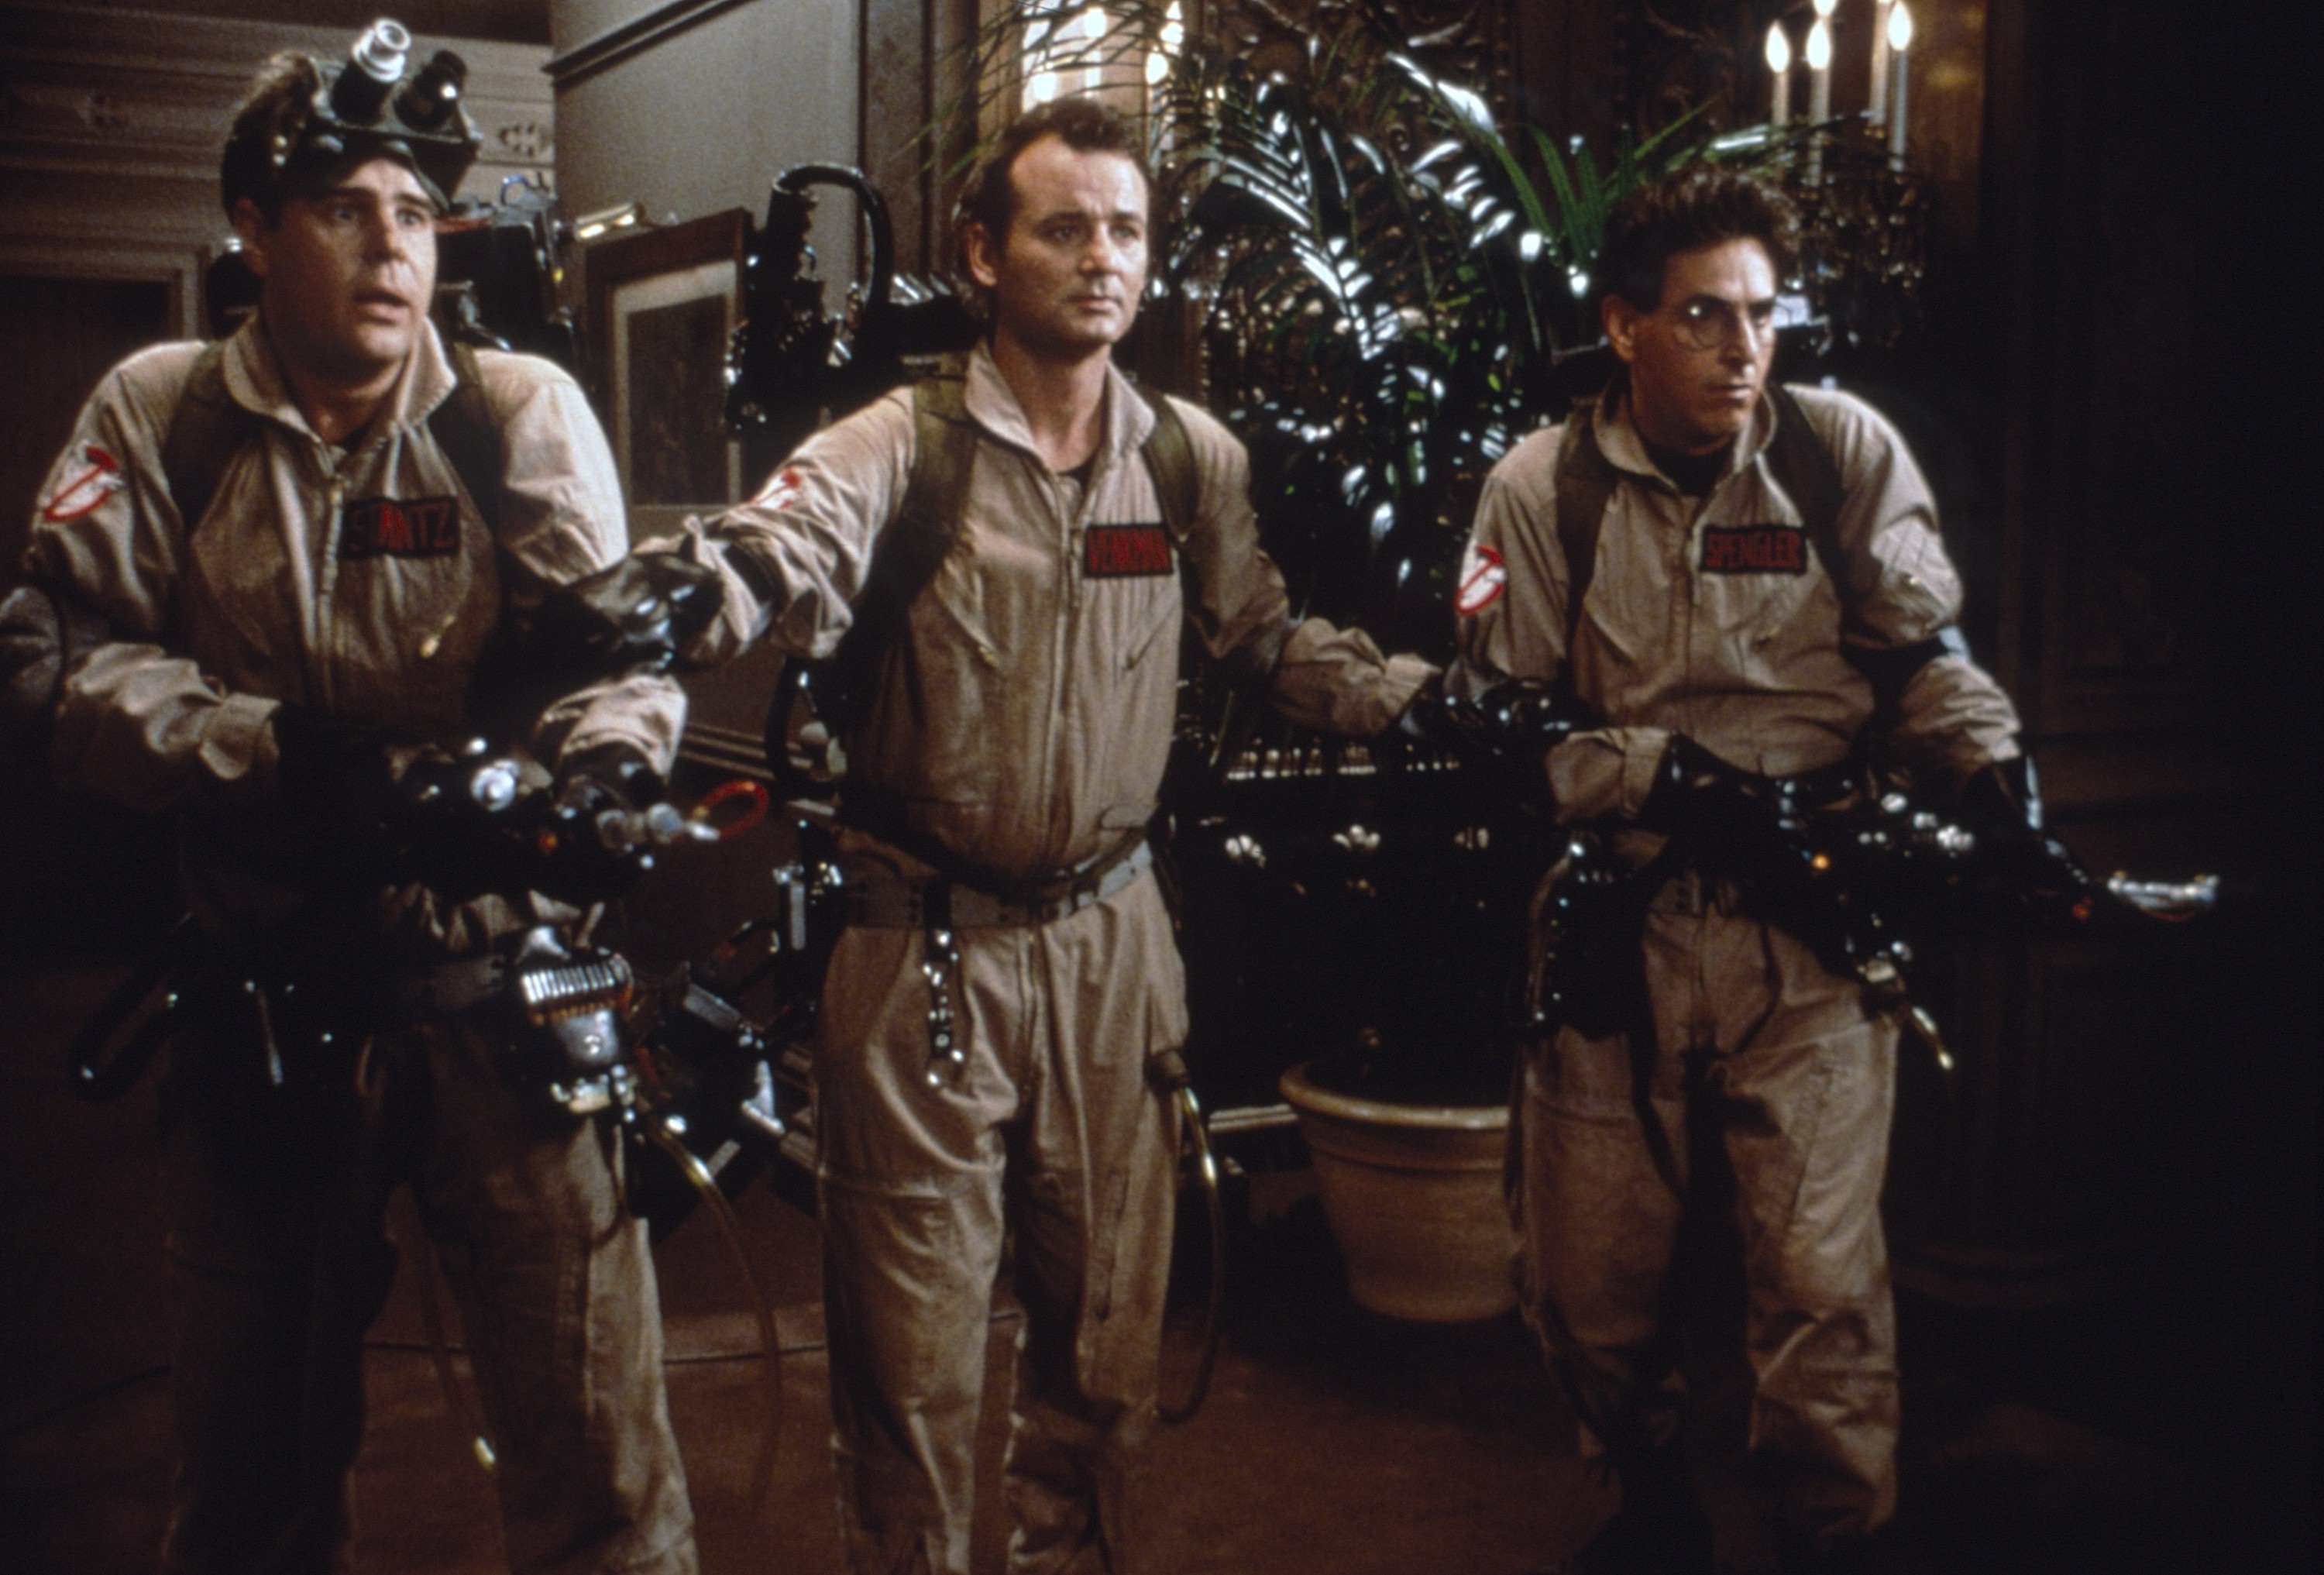 The cast of the original Ghostbusters